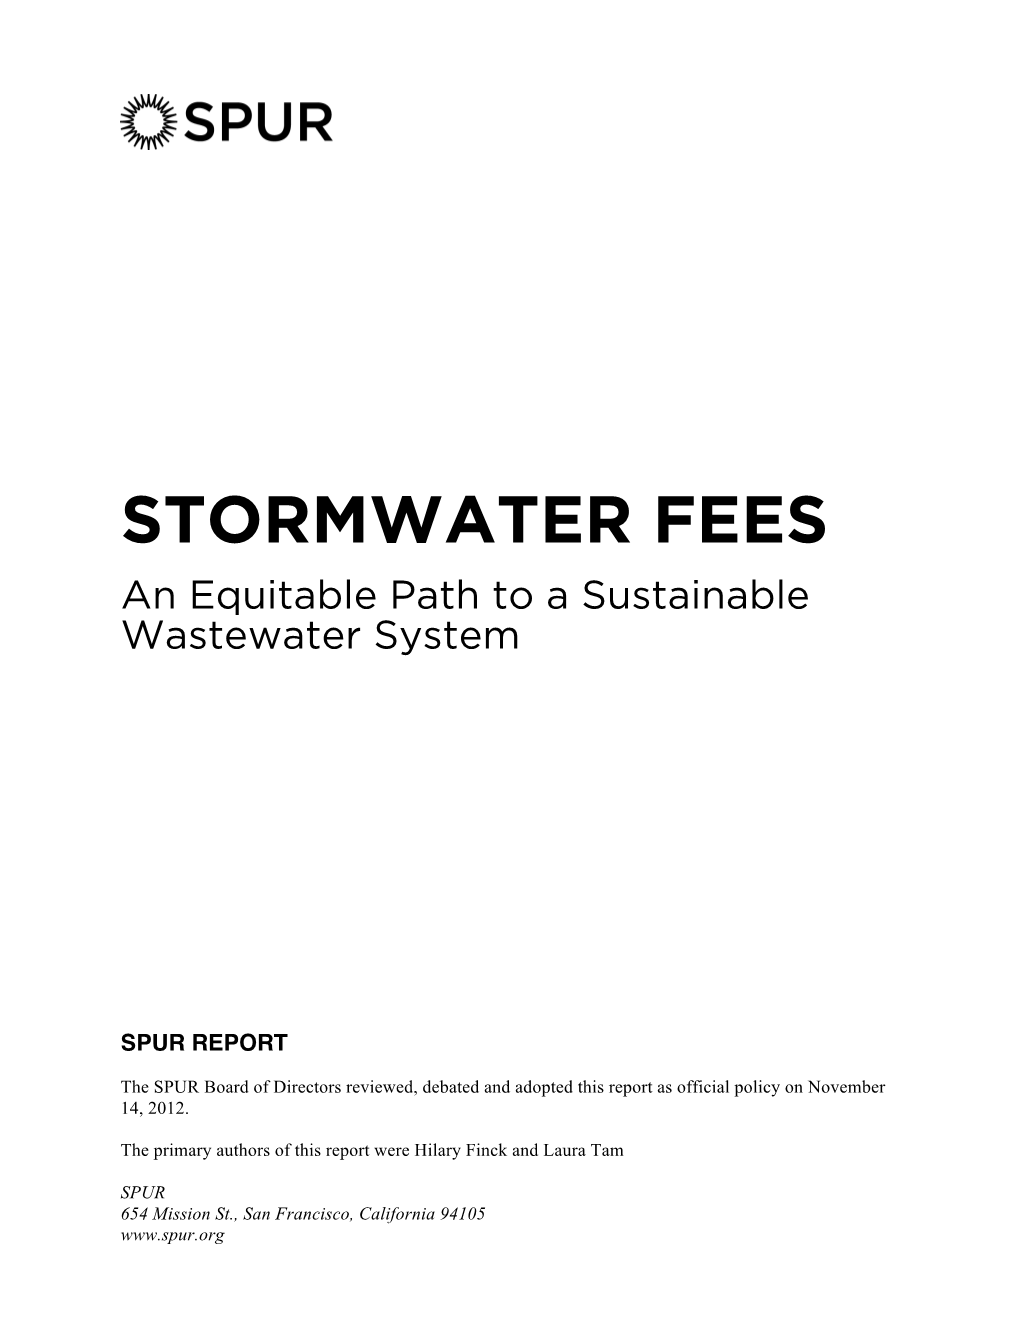 STORMWATER FEES an Equitable Path to a Sustainable Wastewater System